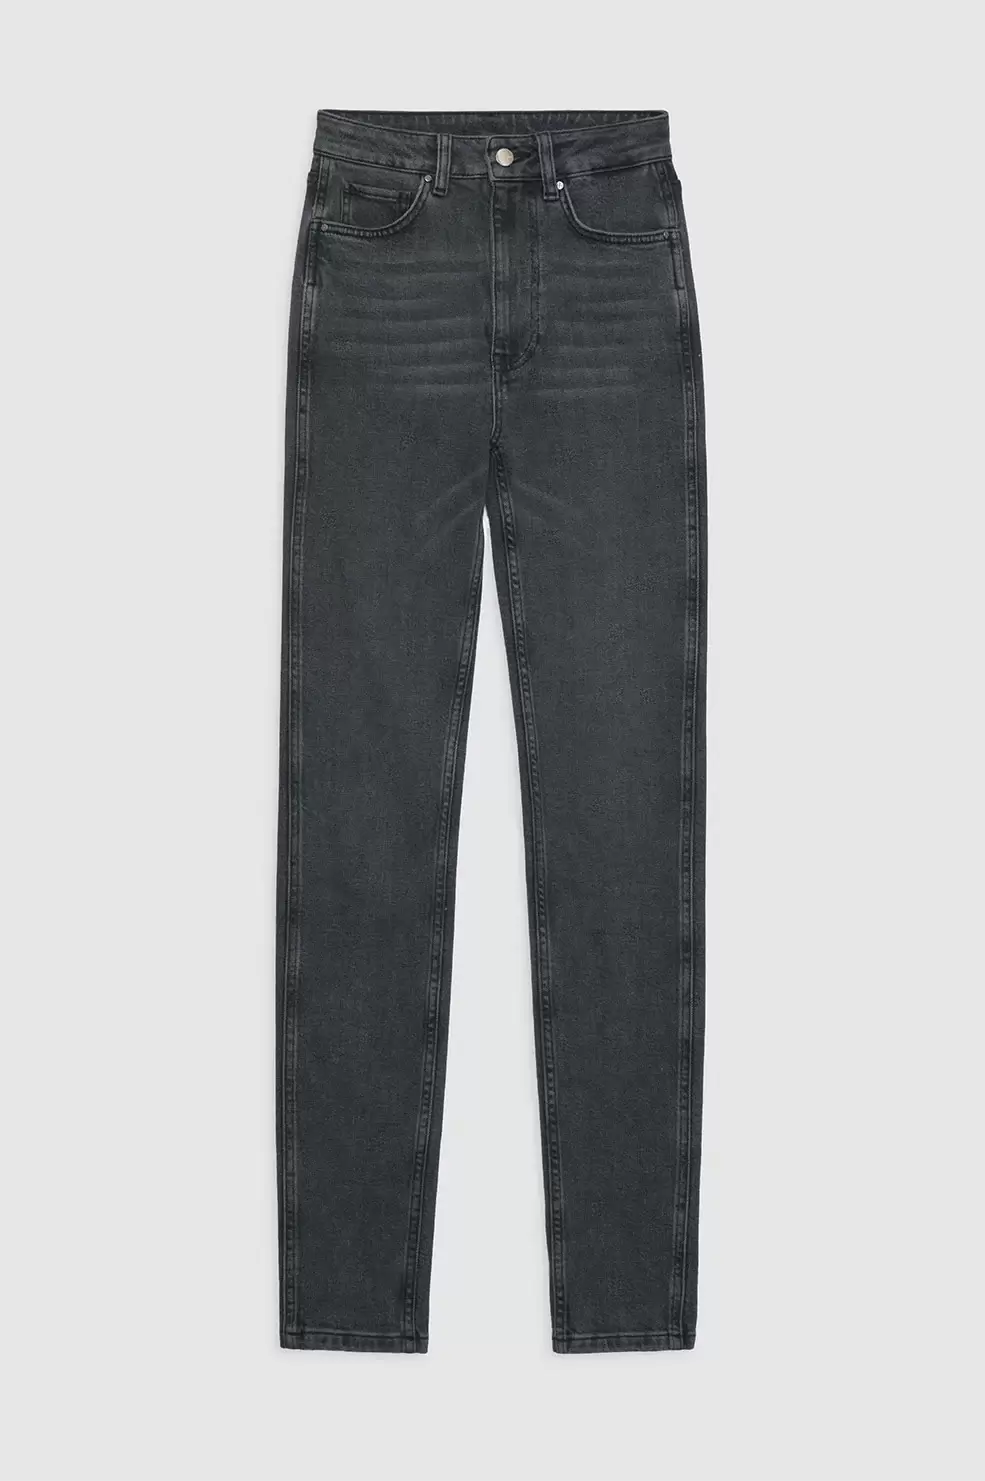 Anine Bing ‘Beck’ High-Rise Skinny Jeans in Iron Gray 